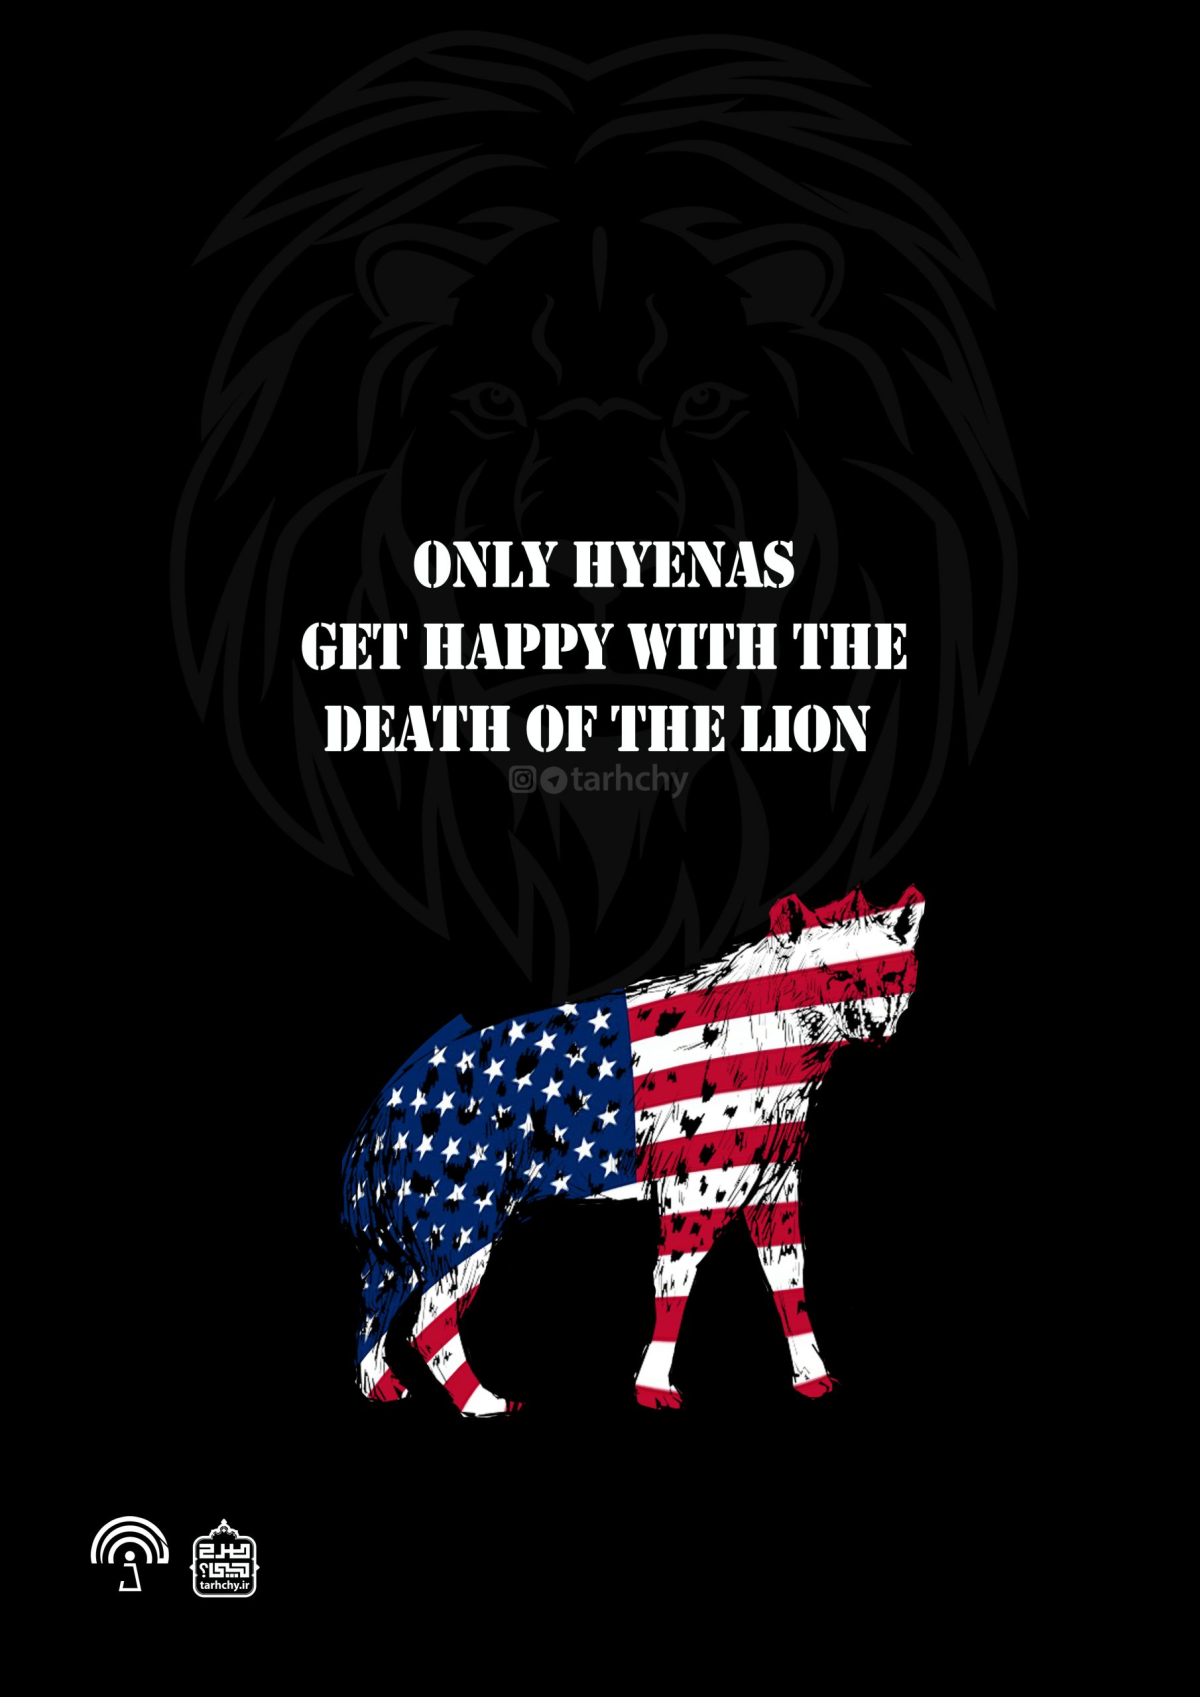  Only hyenas get happy with the death of the lion